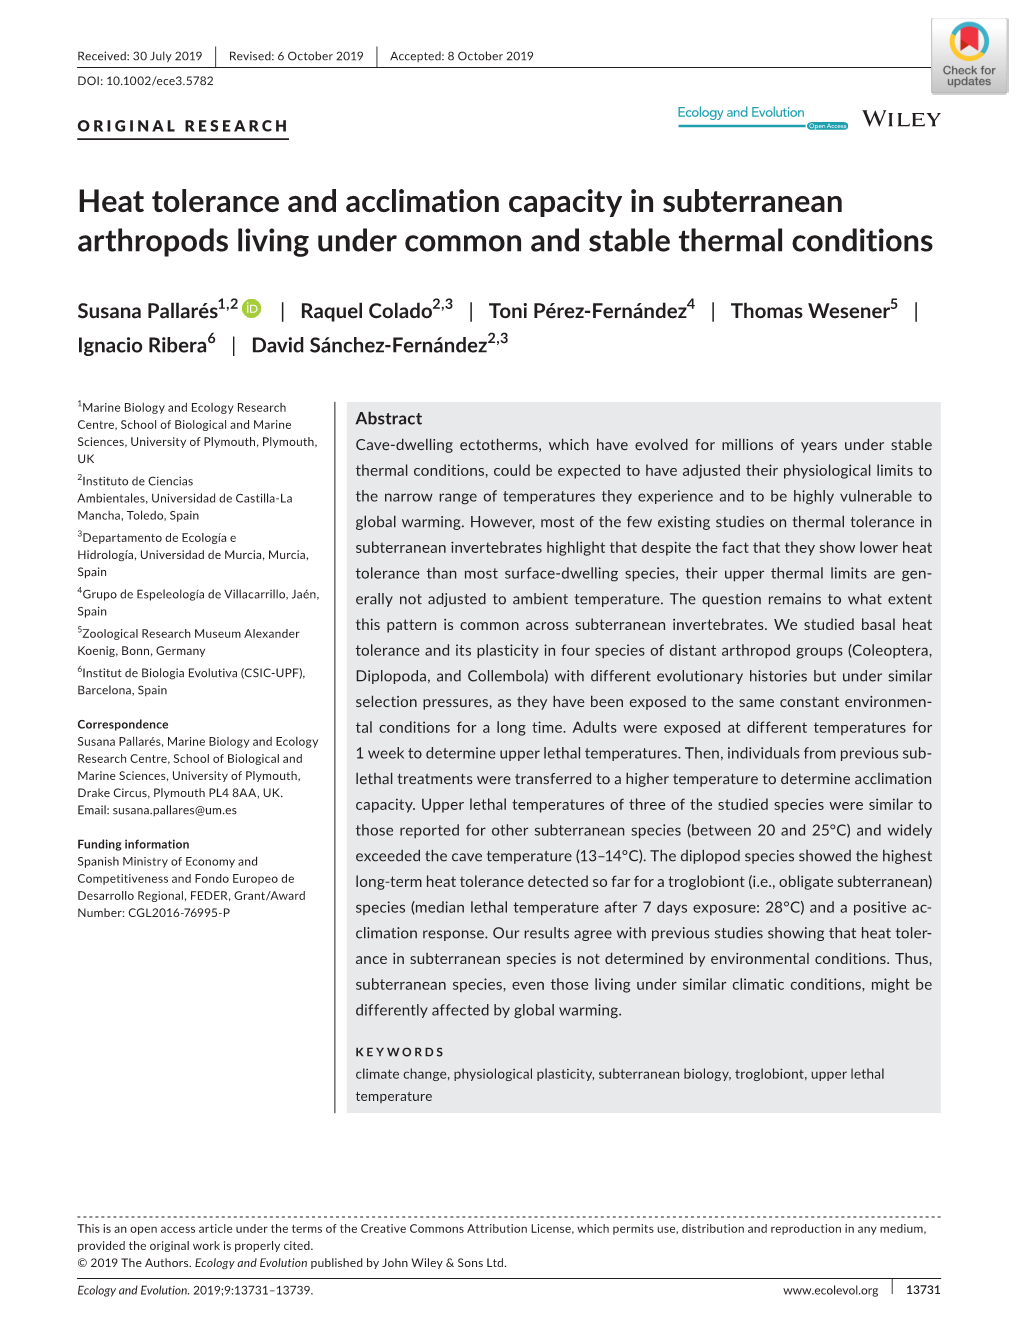 Heat Tolerance and Acclimation Capacity in Subterranean Arthropods Living Under Common and Stable Thermal Conditions